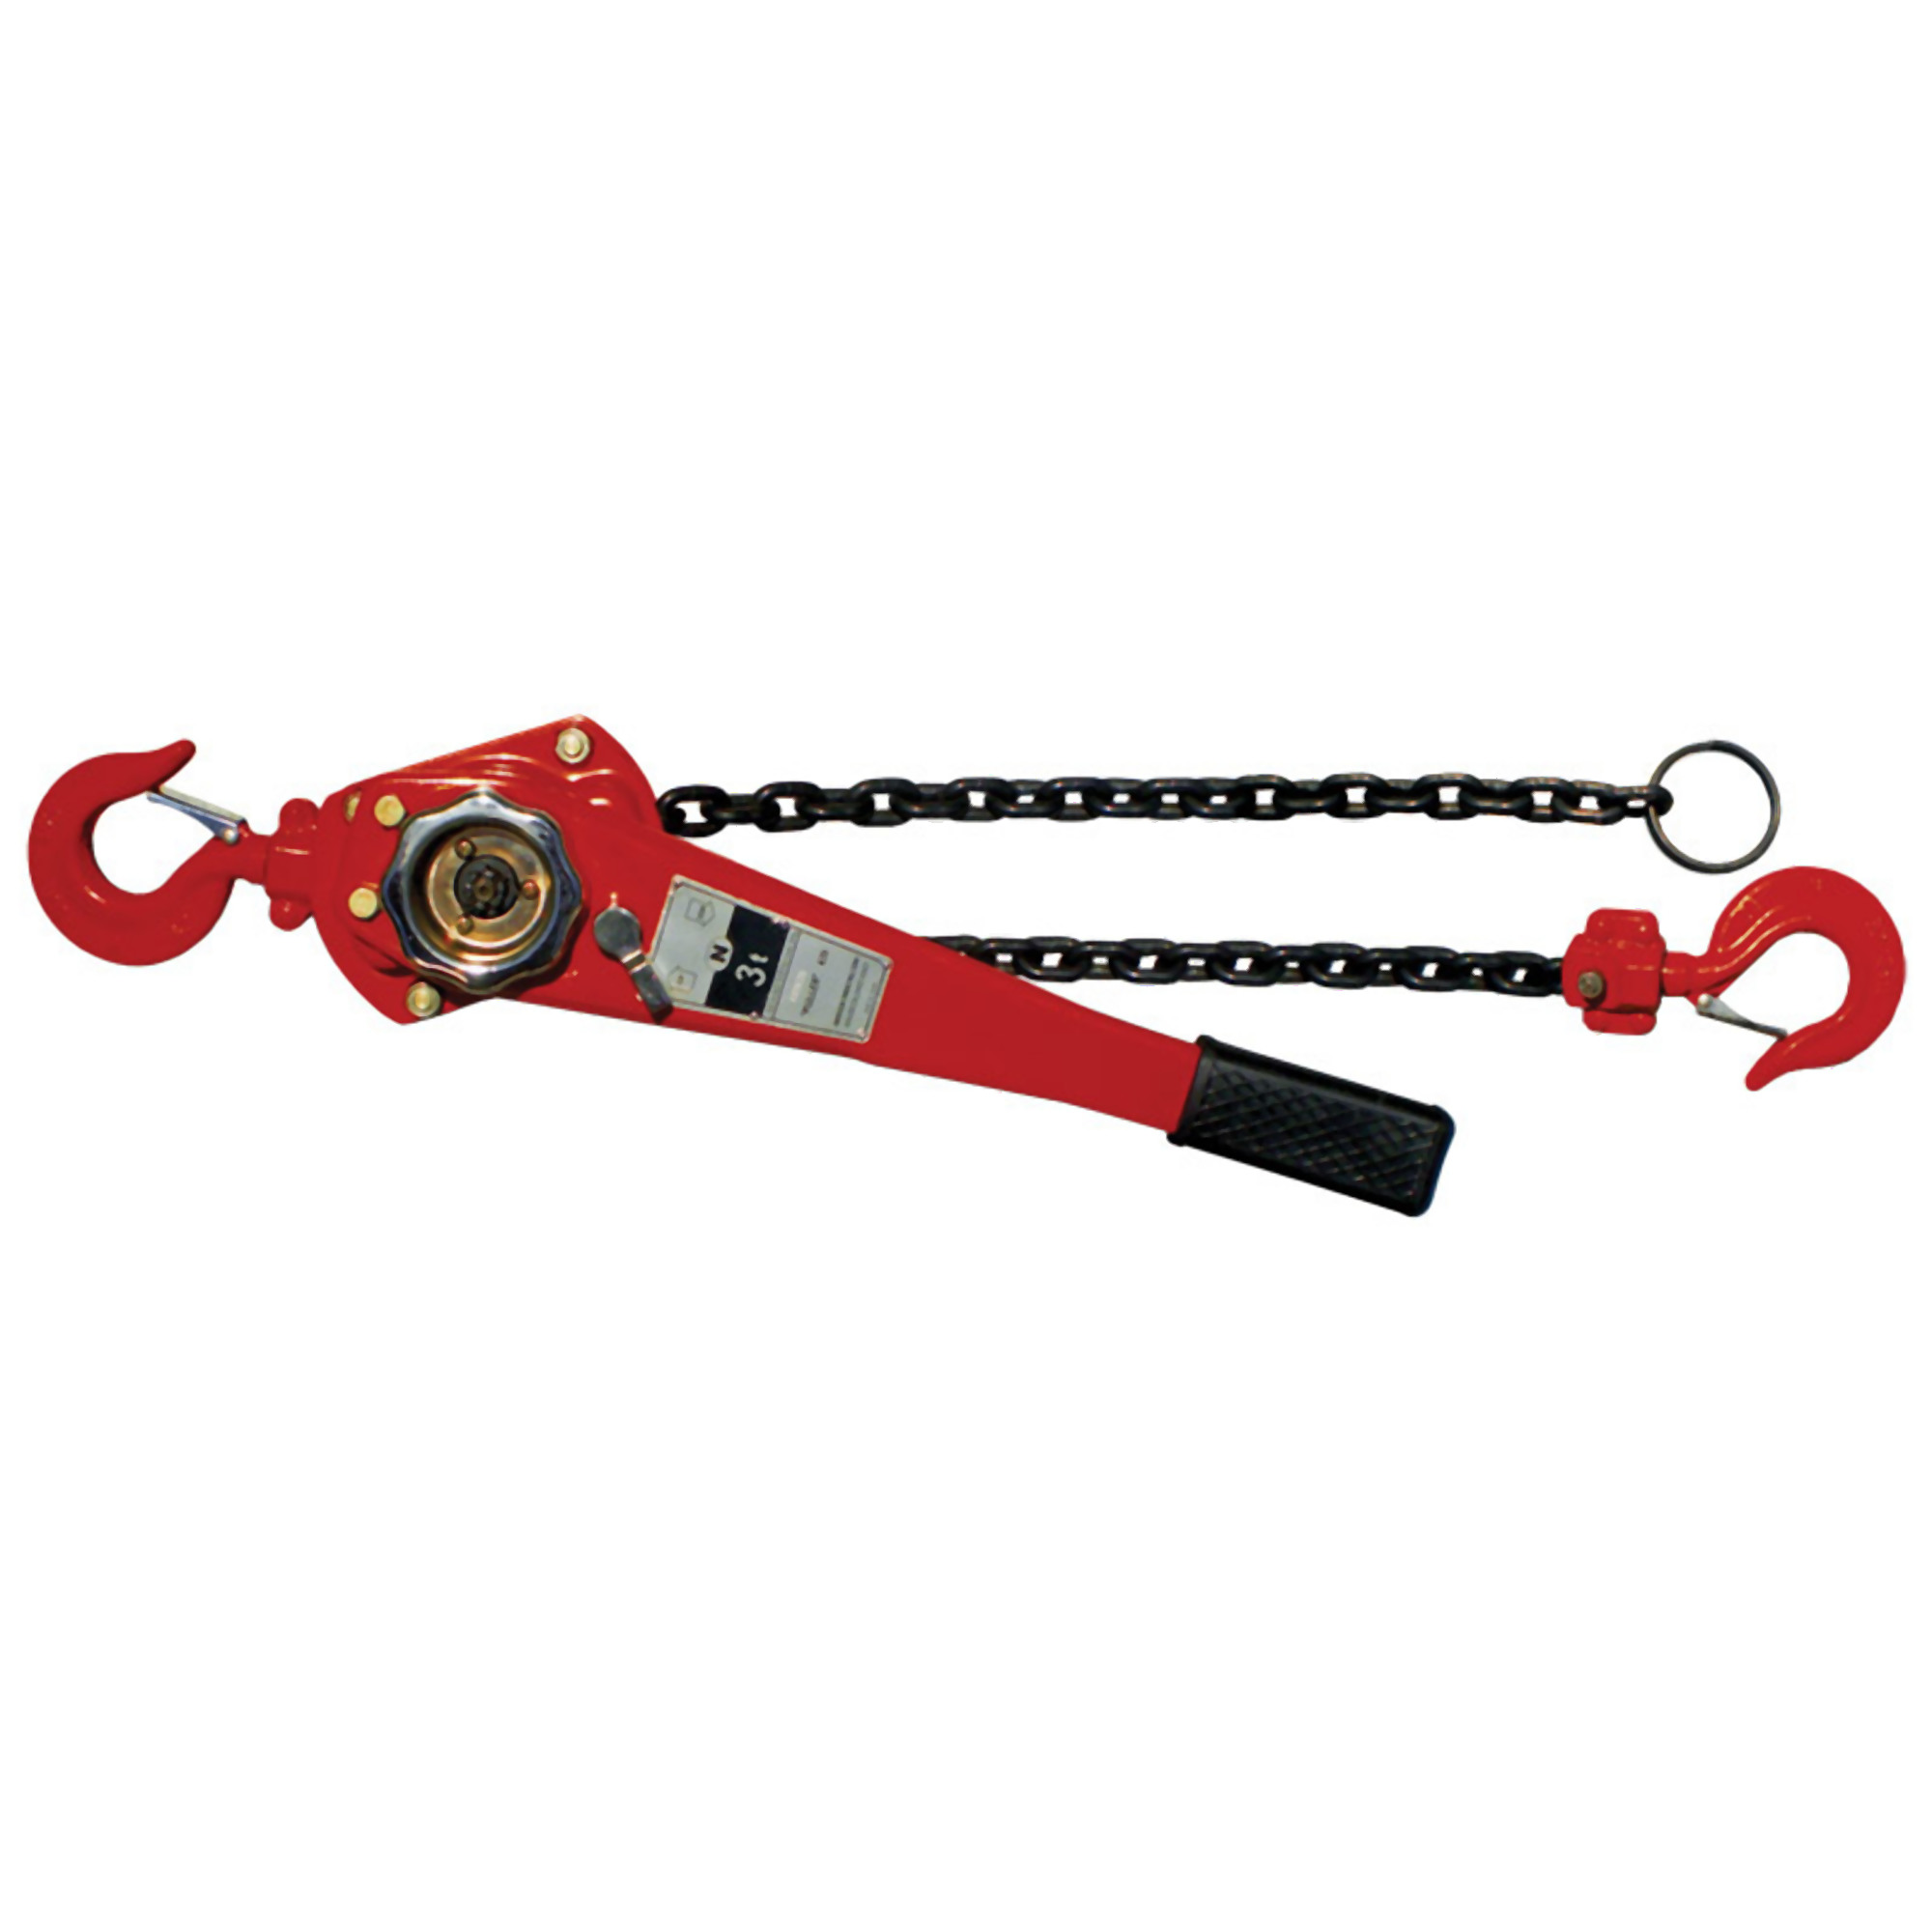 American Power Pull, 3 ton chain puller w/ 10ft. lift, Power Source Manual Lever, Capacity 6000 lb, Lift Height 10 ft, Model 635-10